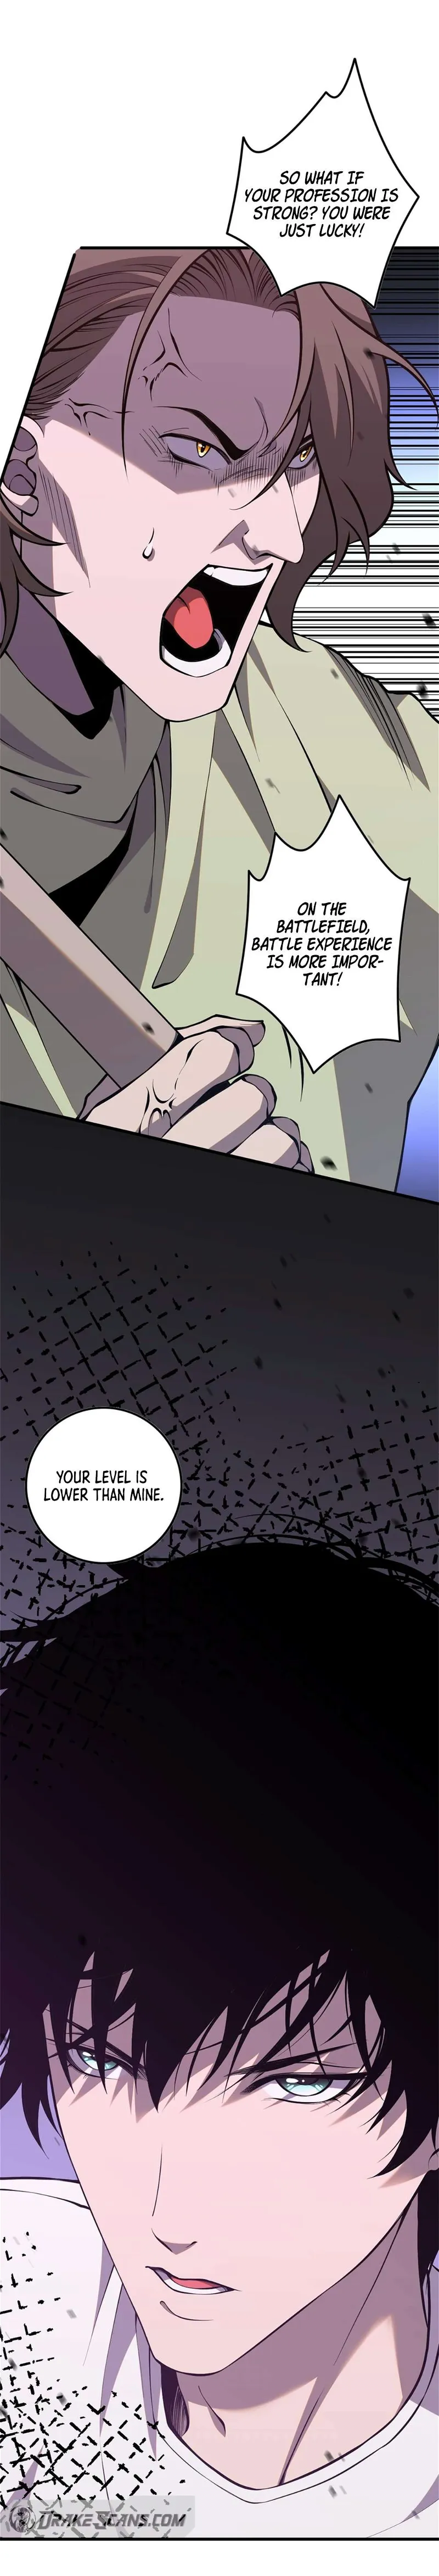 Catastrophic Necromancer Chapter 32 page 9